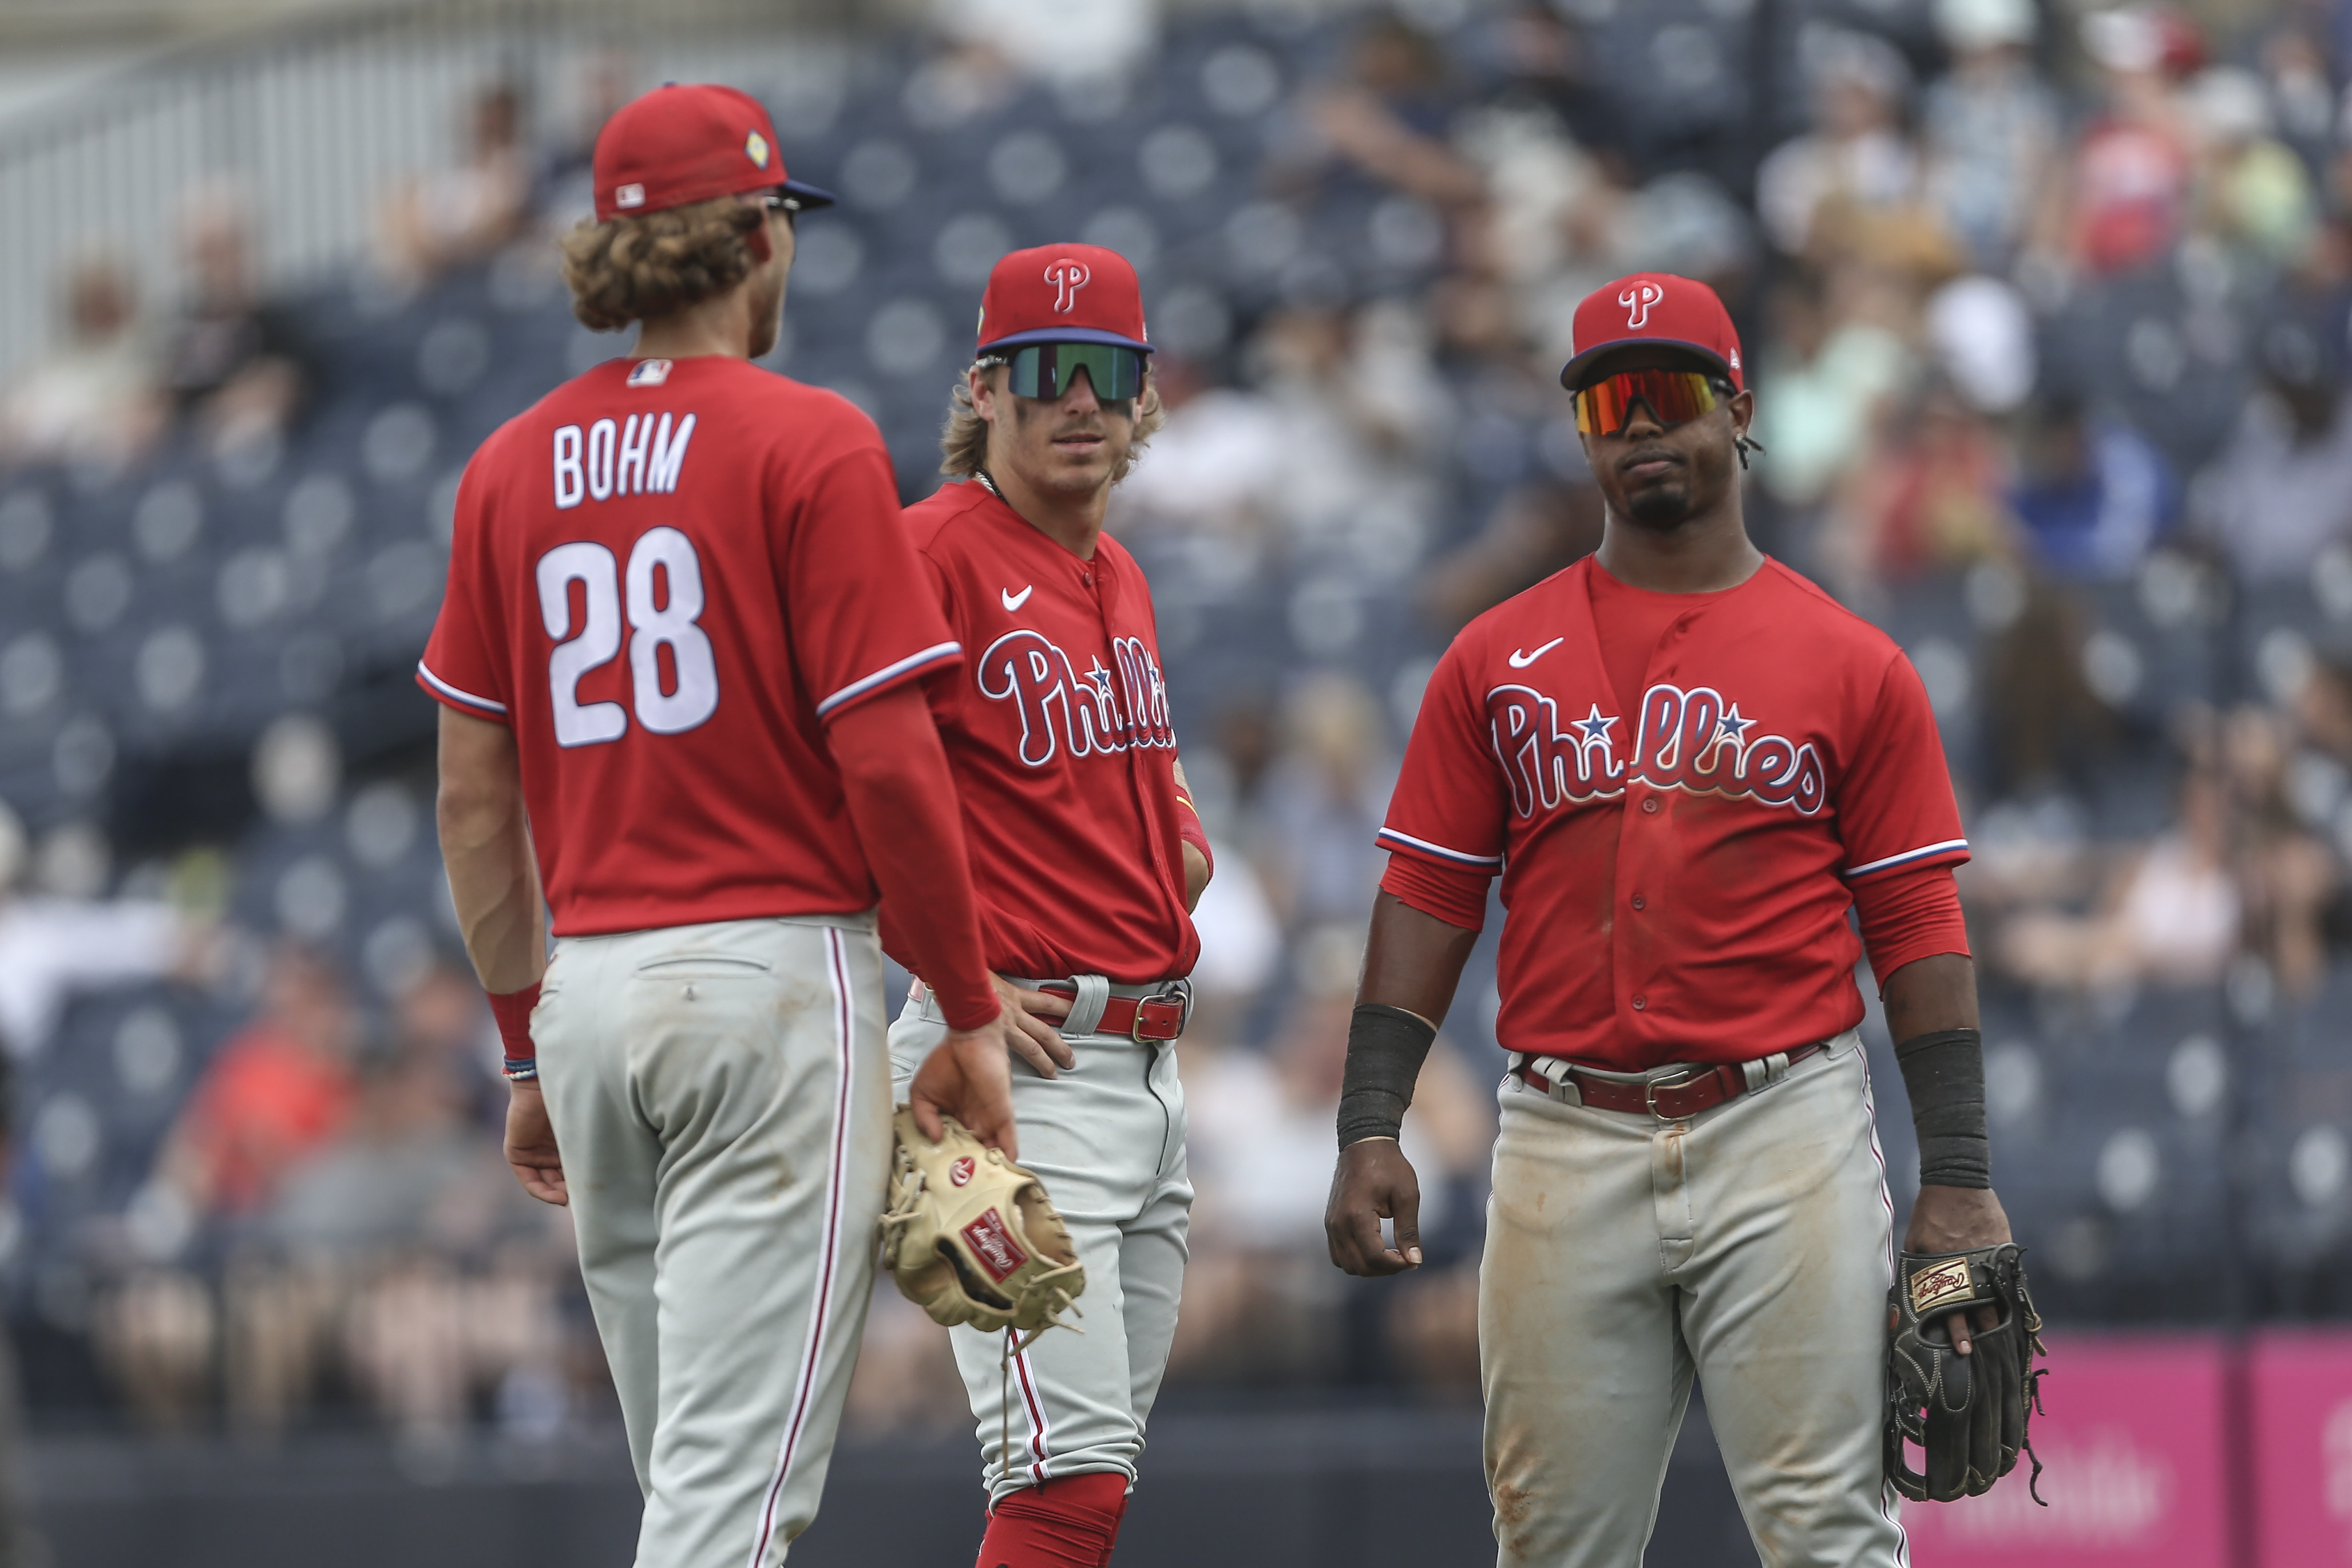 Can Stott, Marsh, and Bohm Keep the Phillies Afloat?